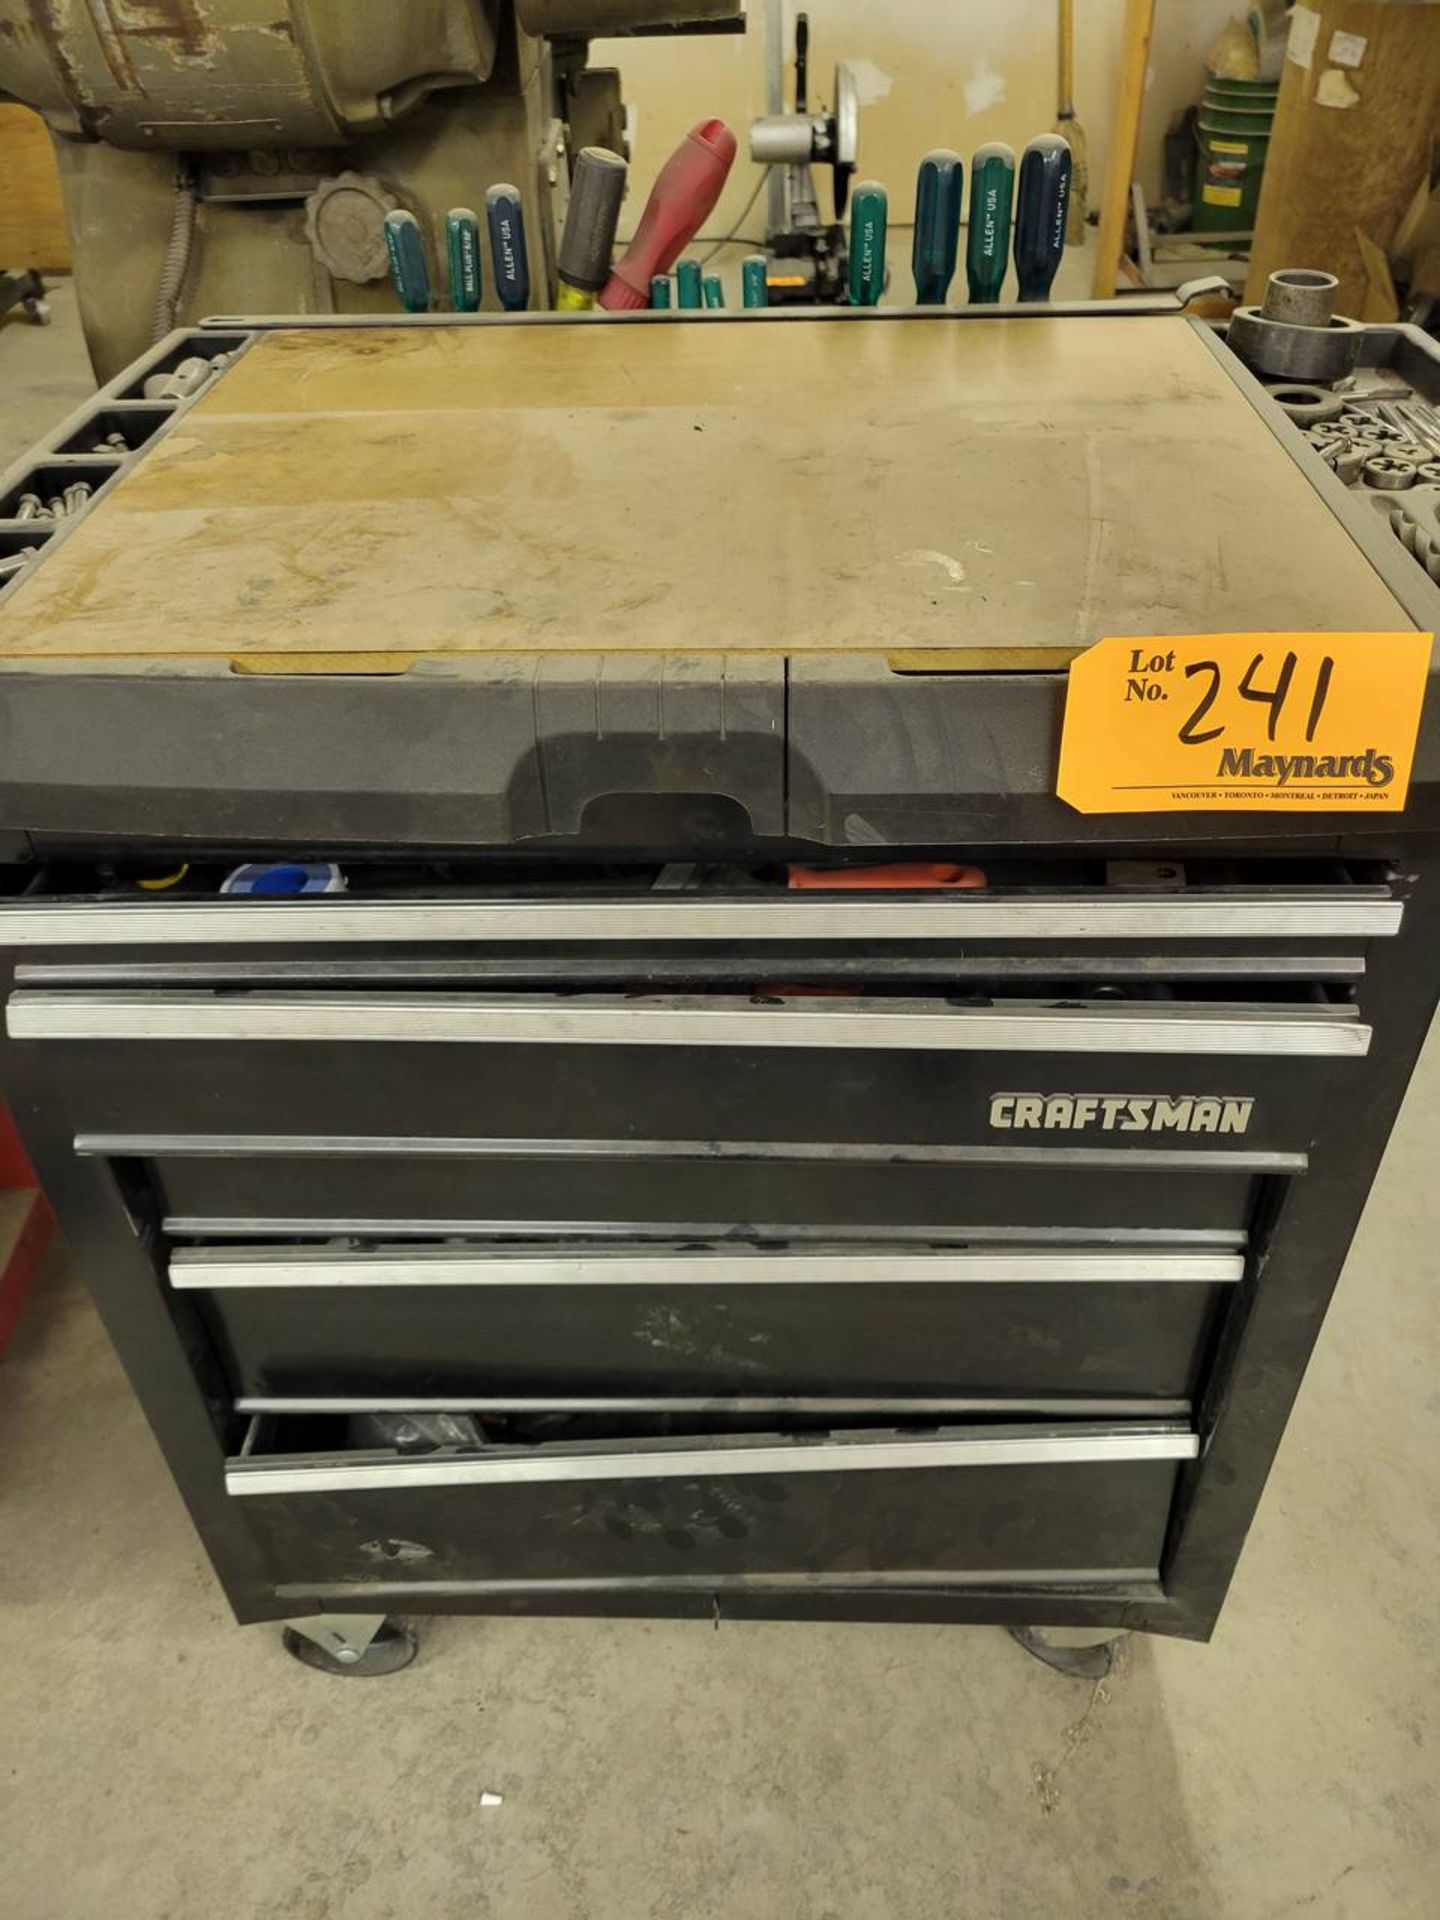 Craftsman 5dr rolling tool cabinet with contents